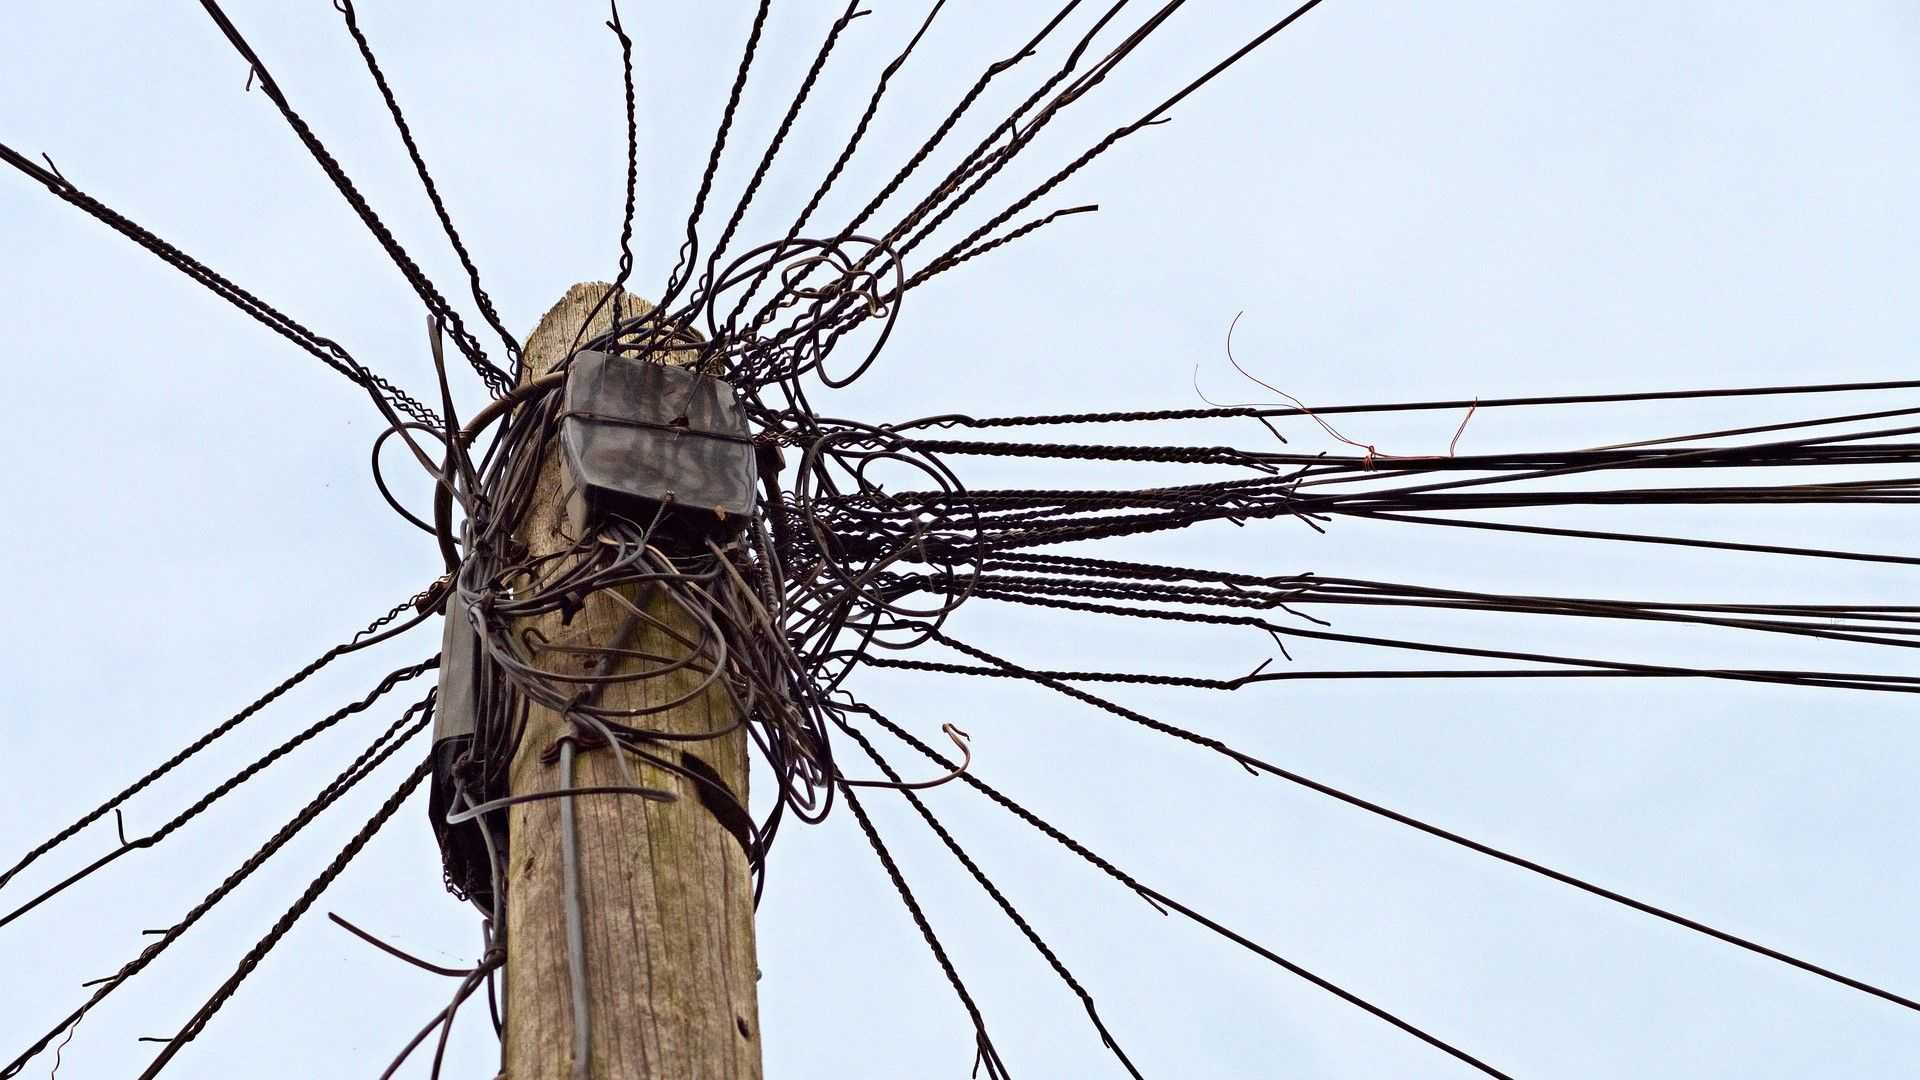 A wooden power pole with many electric wires